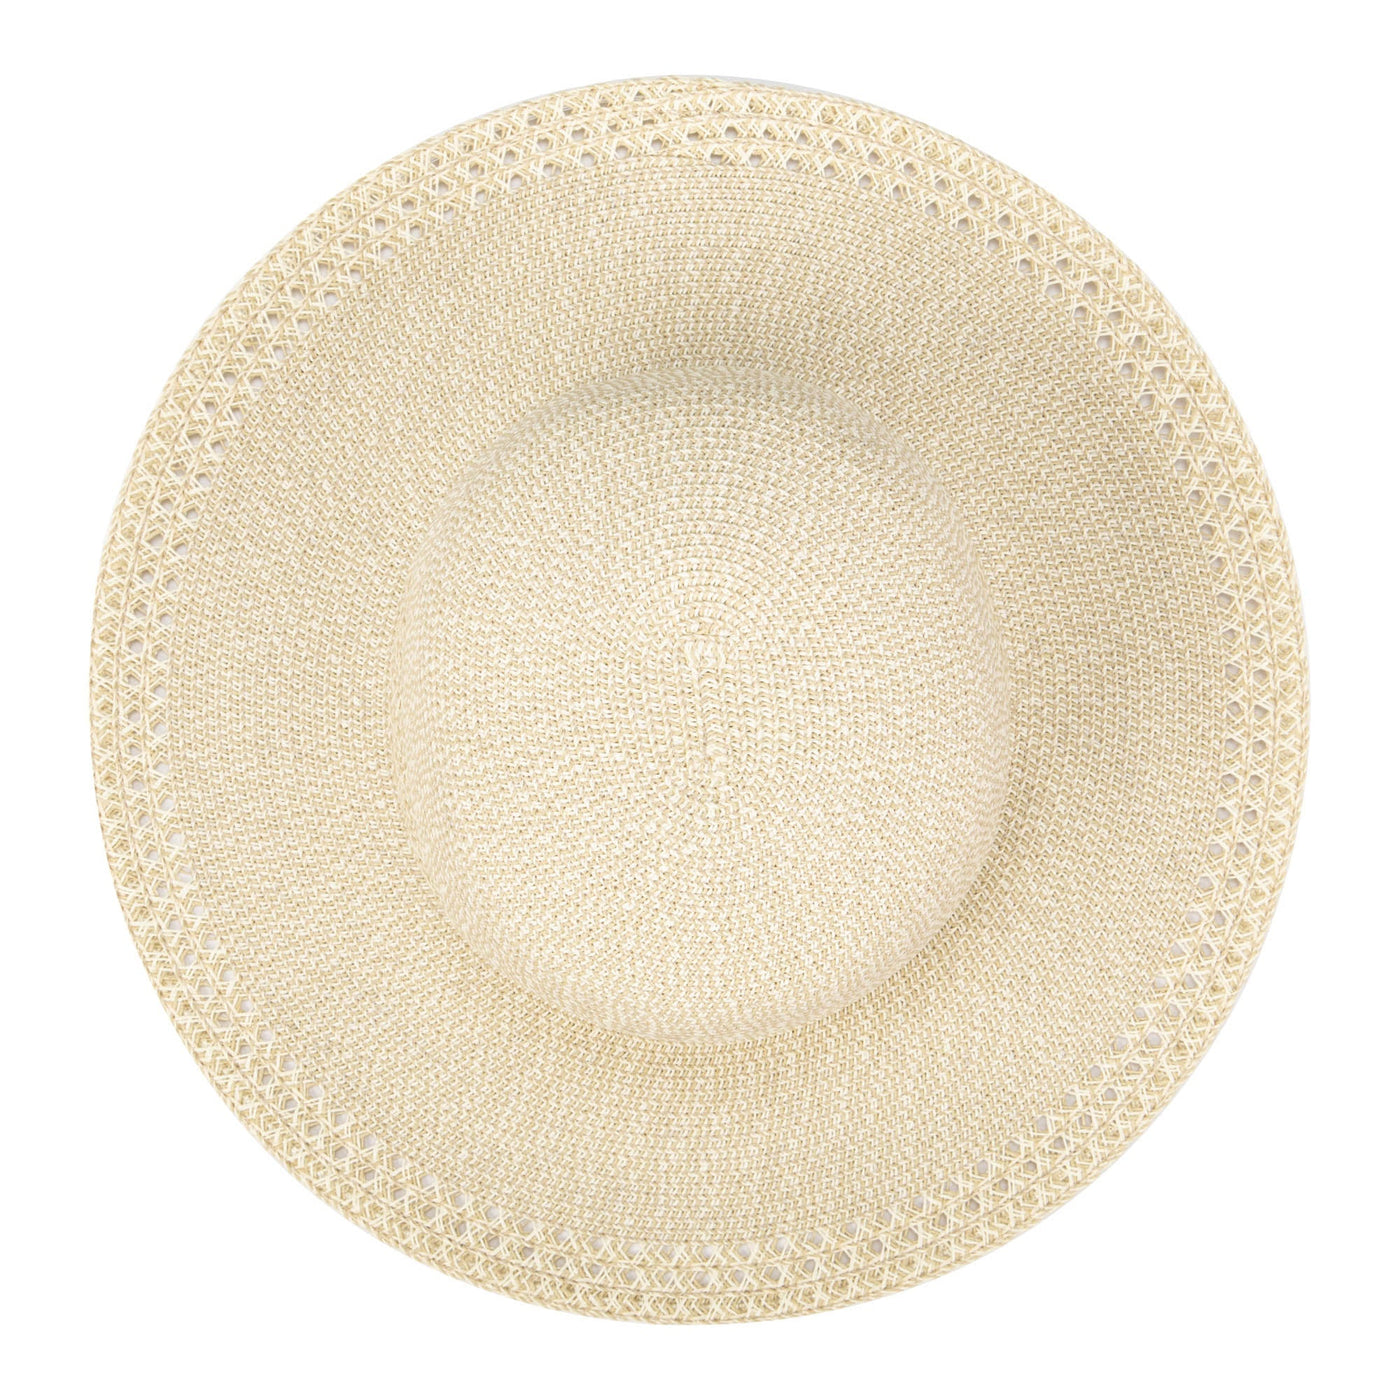 Everyday Sun Hat - Women's Sun Hat with Open Weave Stripes